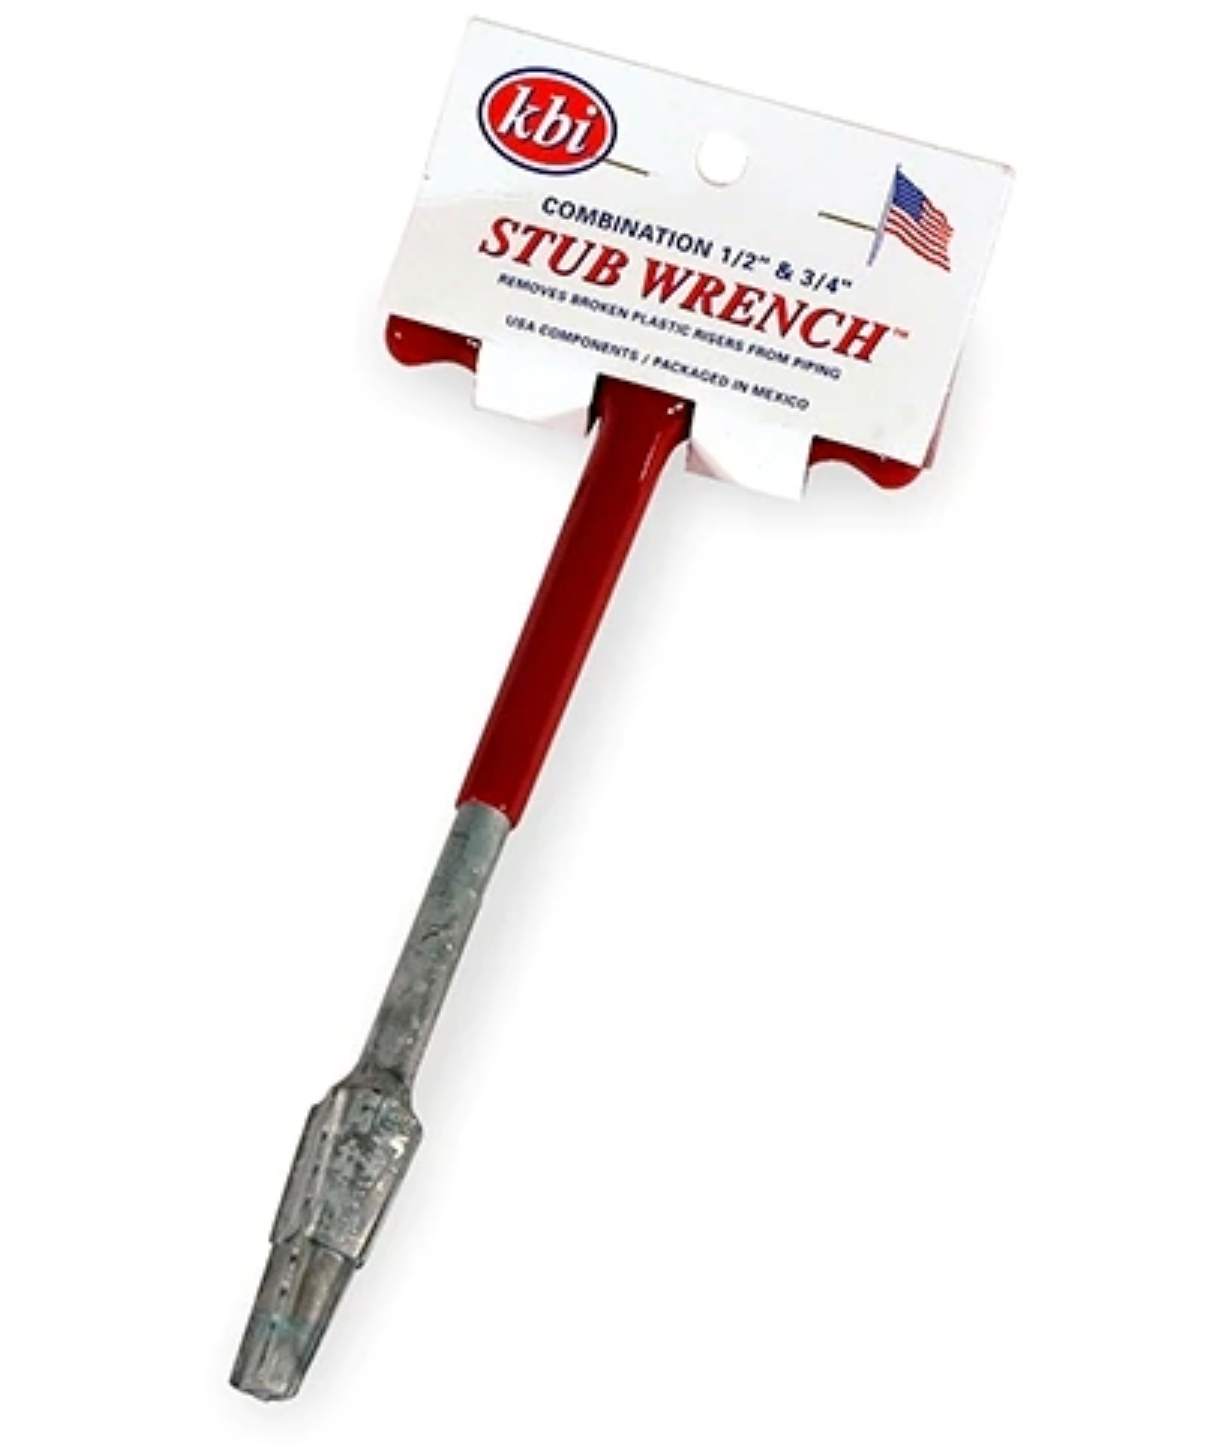 NDS - SW-0500-C - Combination Stub Wrench 1/2 in. & 3/4 in.